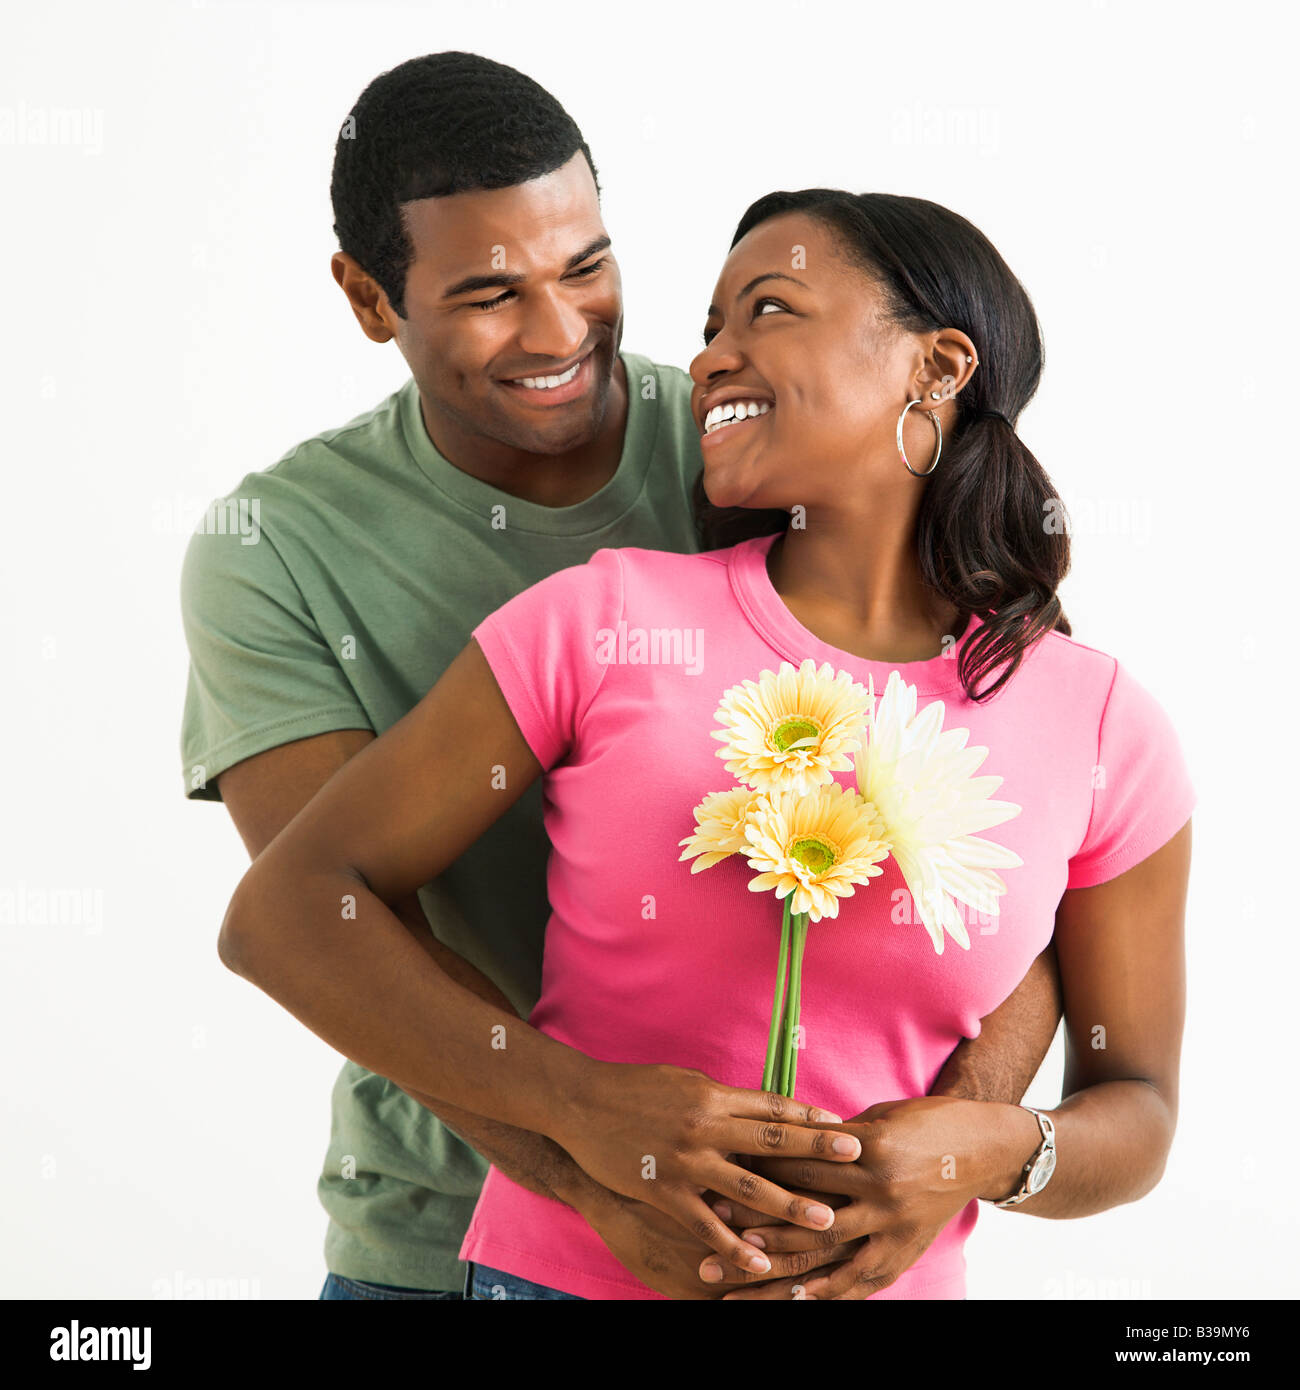 Portrait of smiling African American couple standing looking at each other Stock Photo